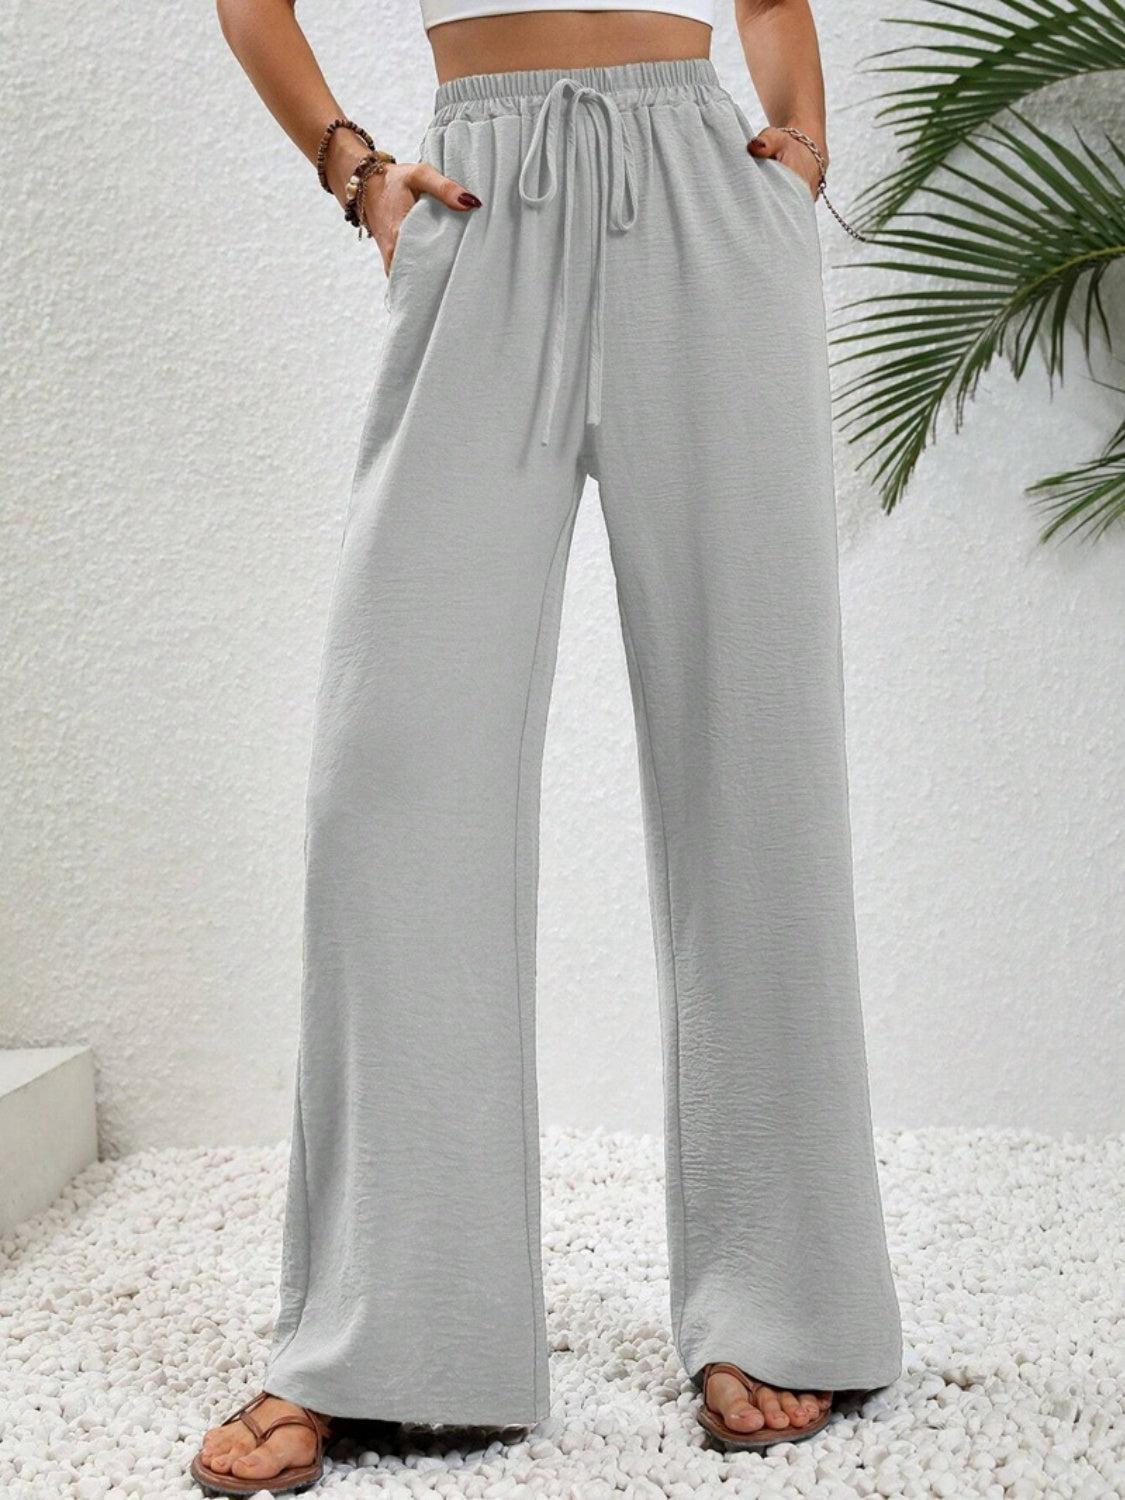 Discover chic comfort with our Wide Leg Drawstring Pants—perfect for any occasion, available in 9 colors. Elevate your wardrobe today!